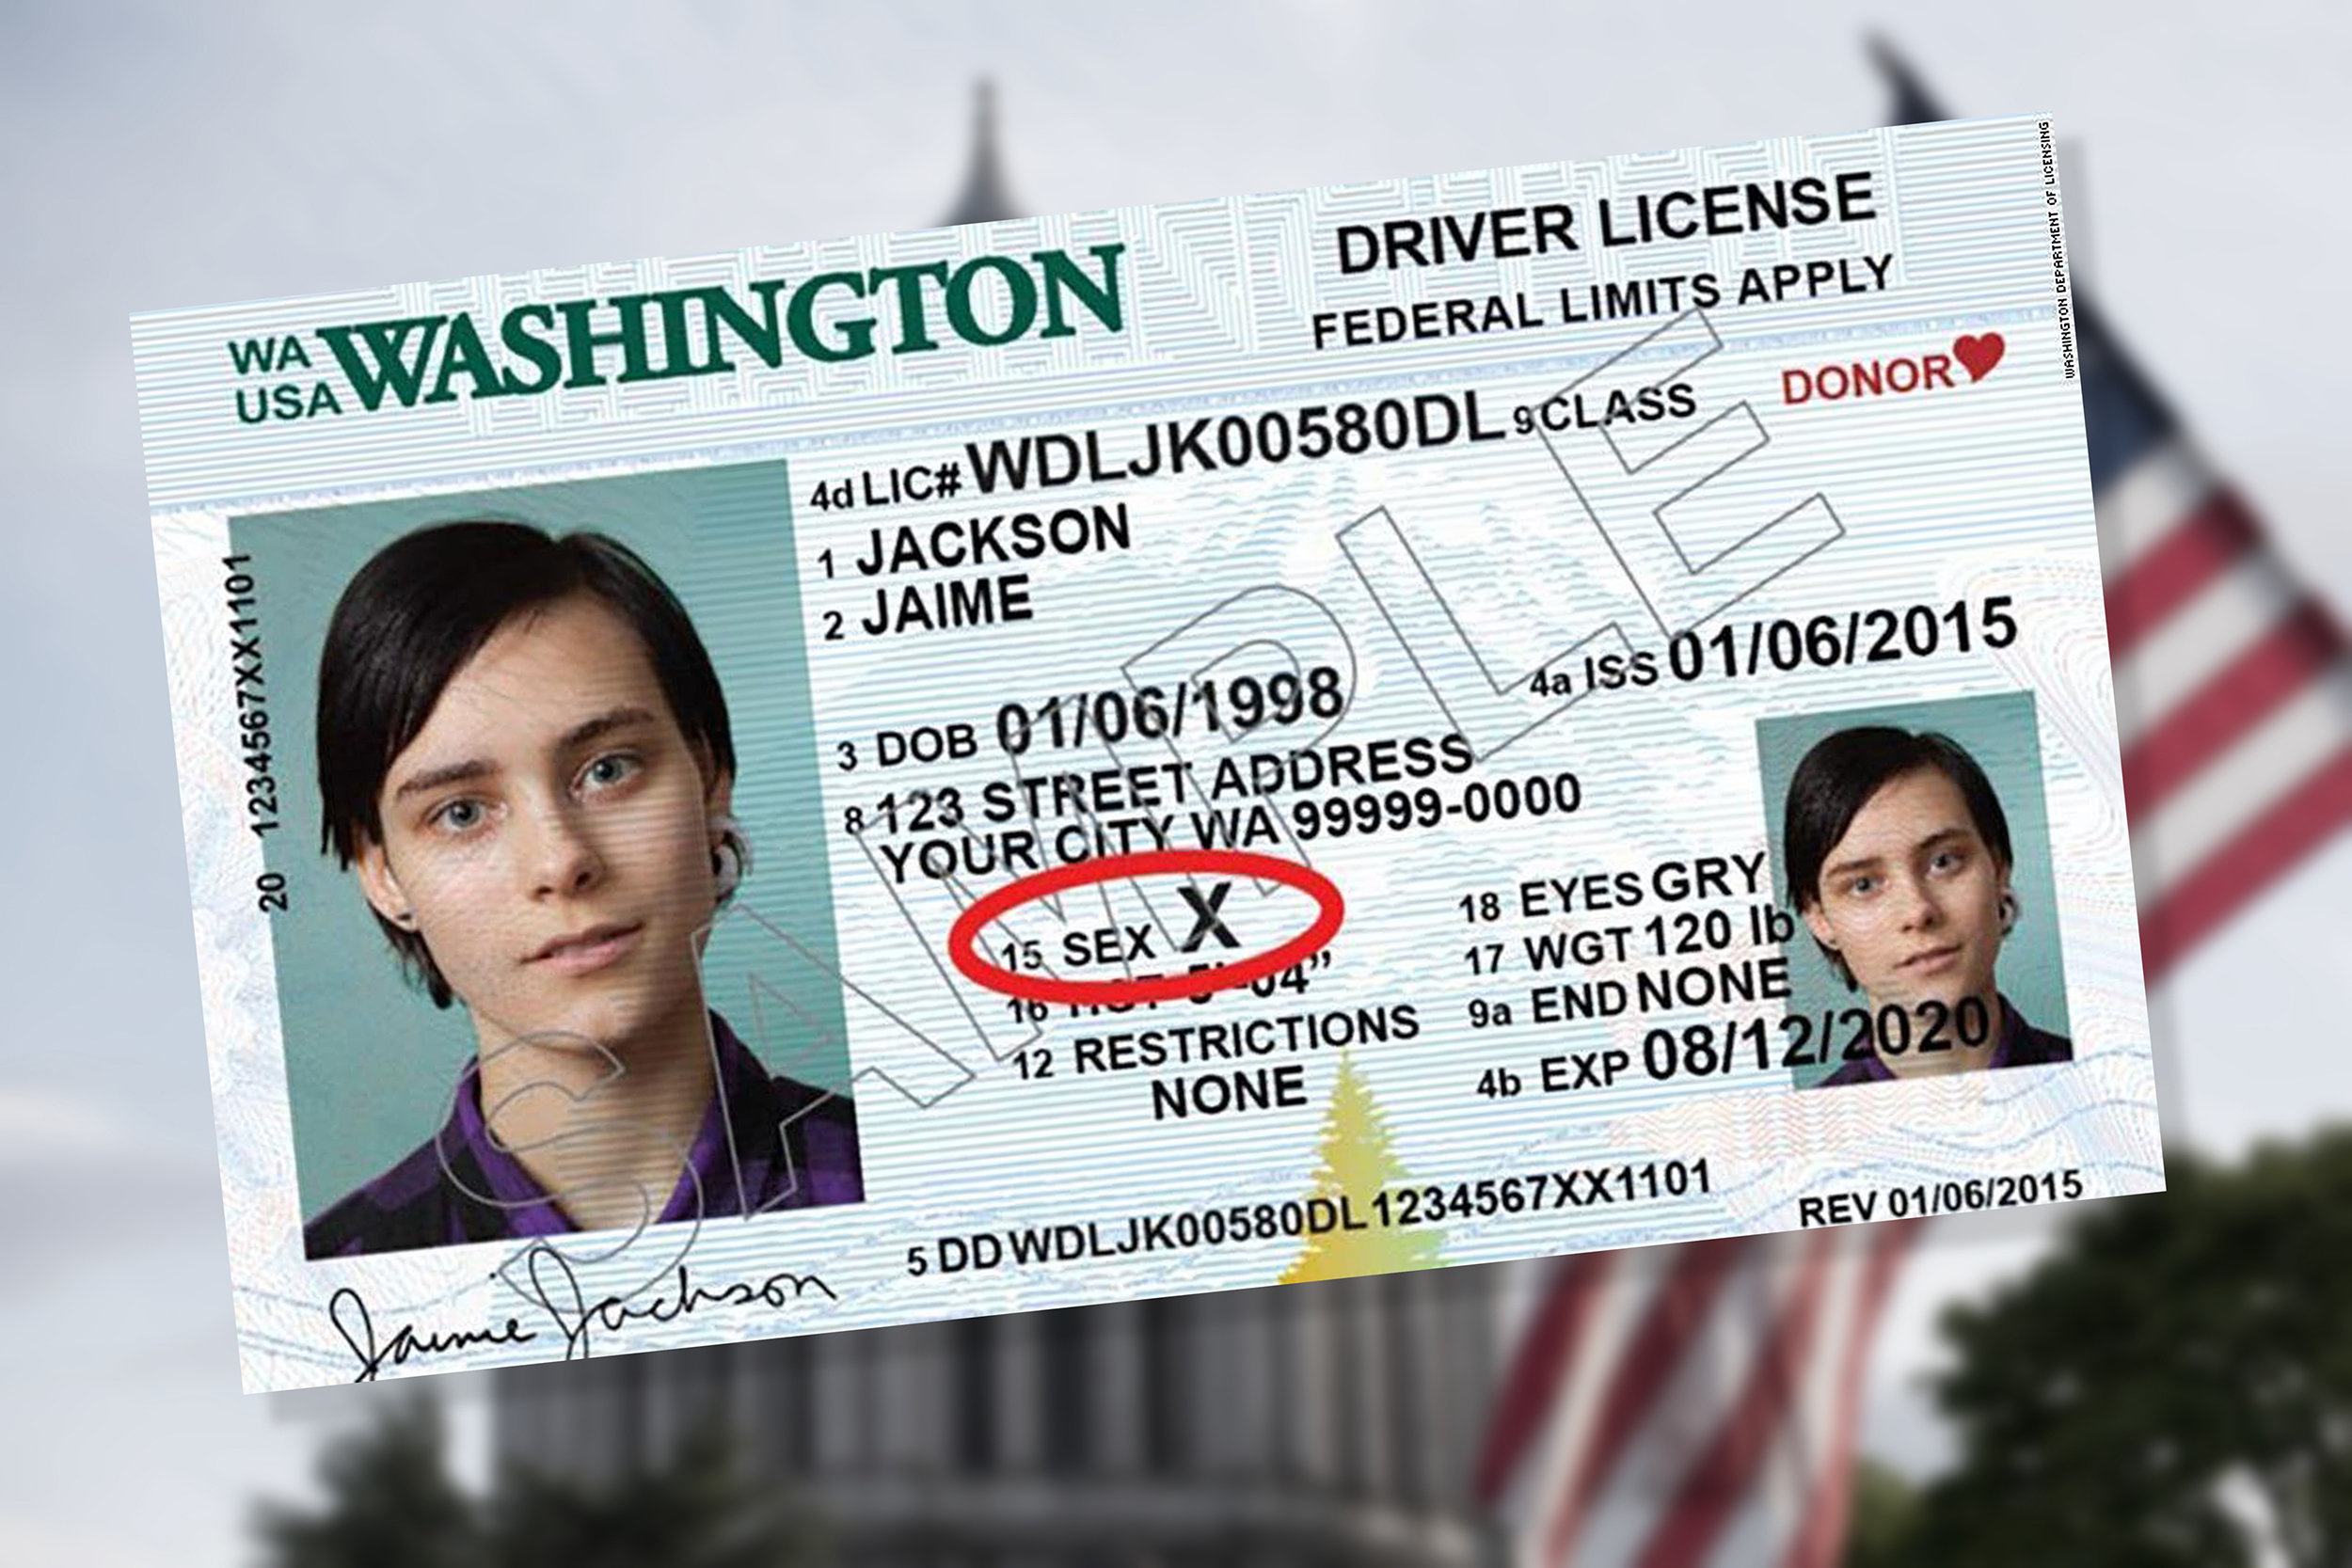 A license shows the gender ‘X’ option.